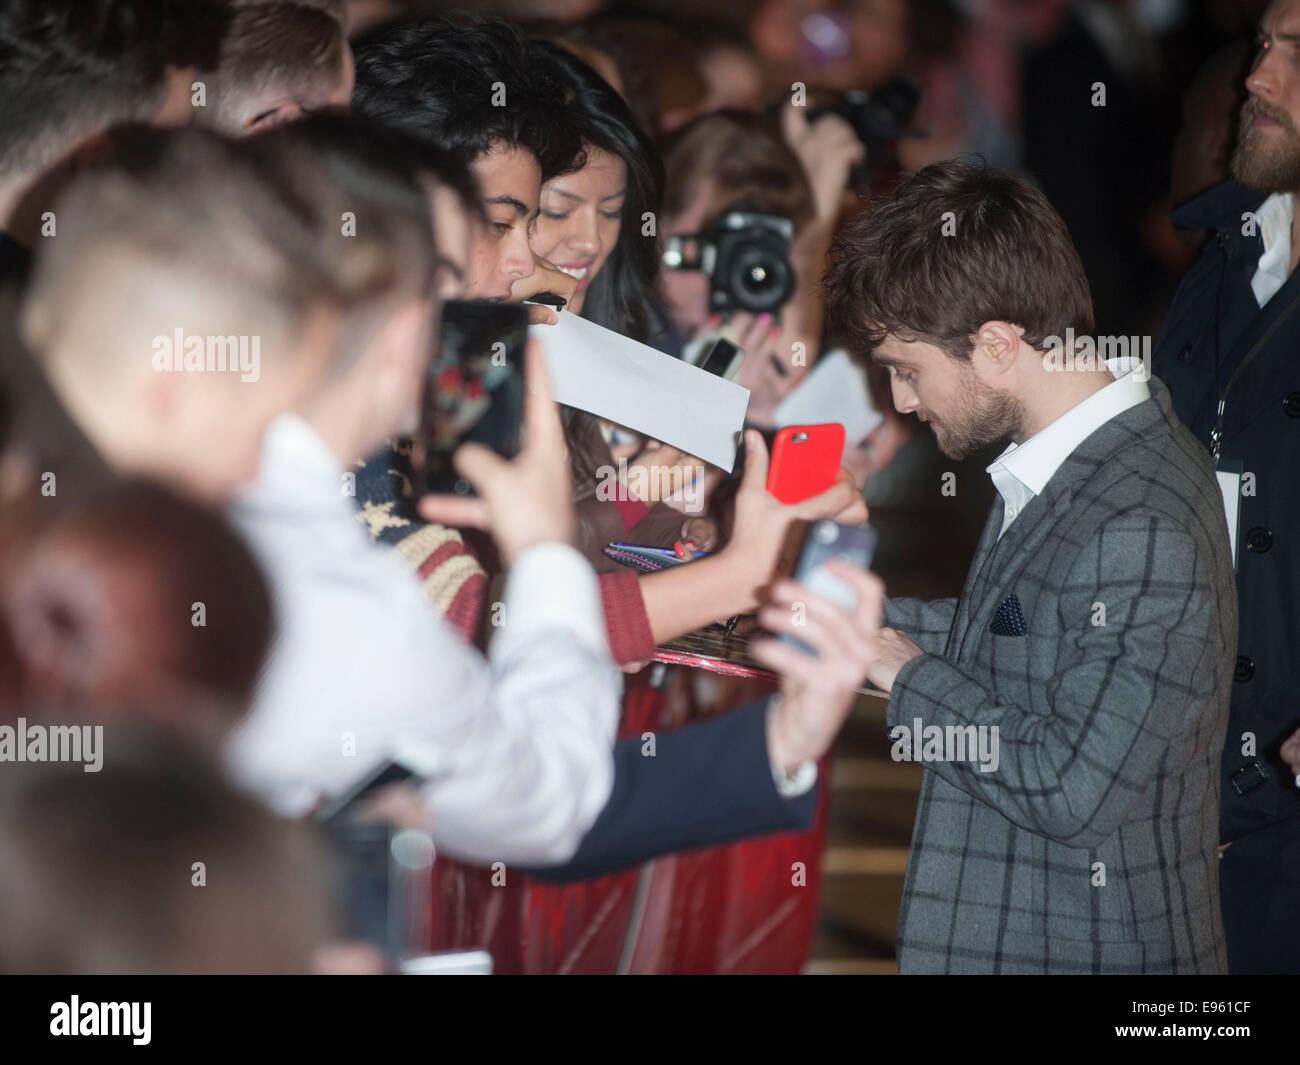 London, UK. 20th Oct, 2014. Daniel Radcliffe   attends 'Horns' UK Premiere at the Odeon West End in London, England. 20th October 2014 Picture by Brian Jordan/Alamy Live News Stock Photo